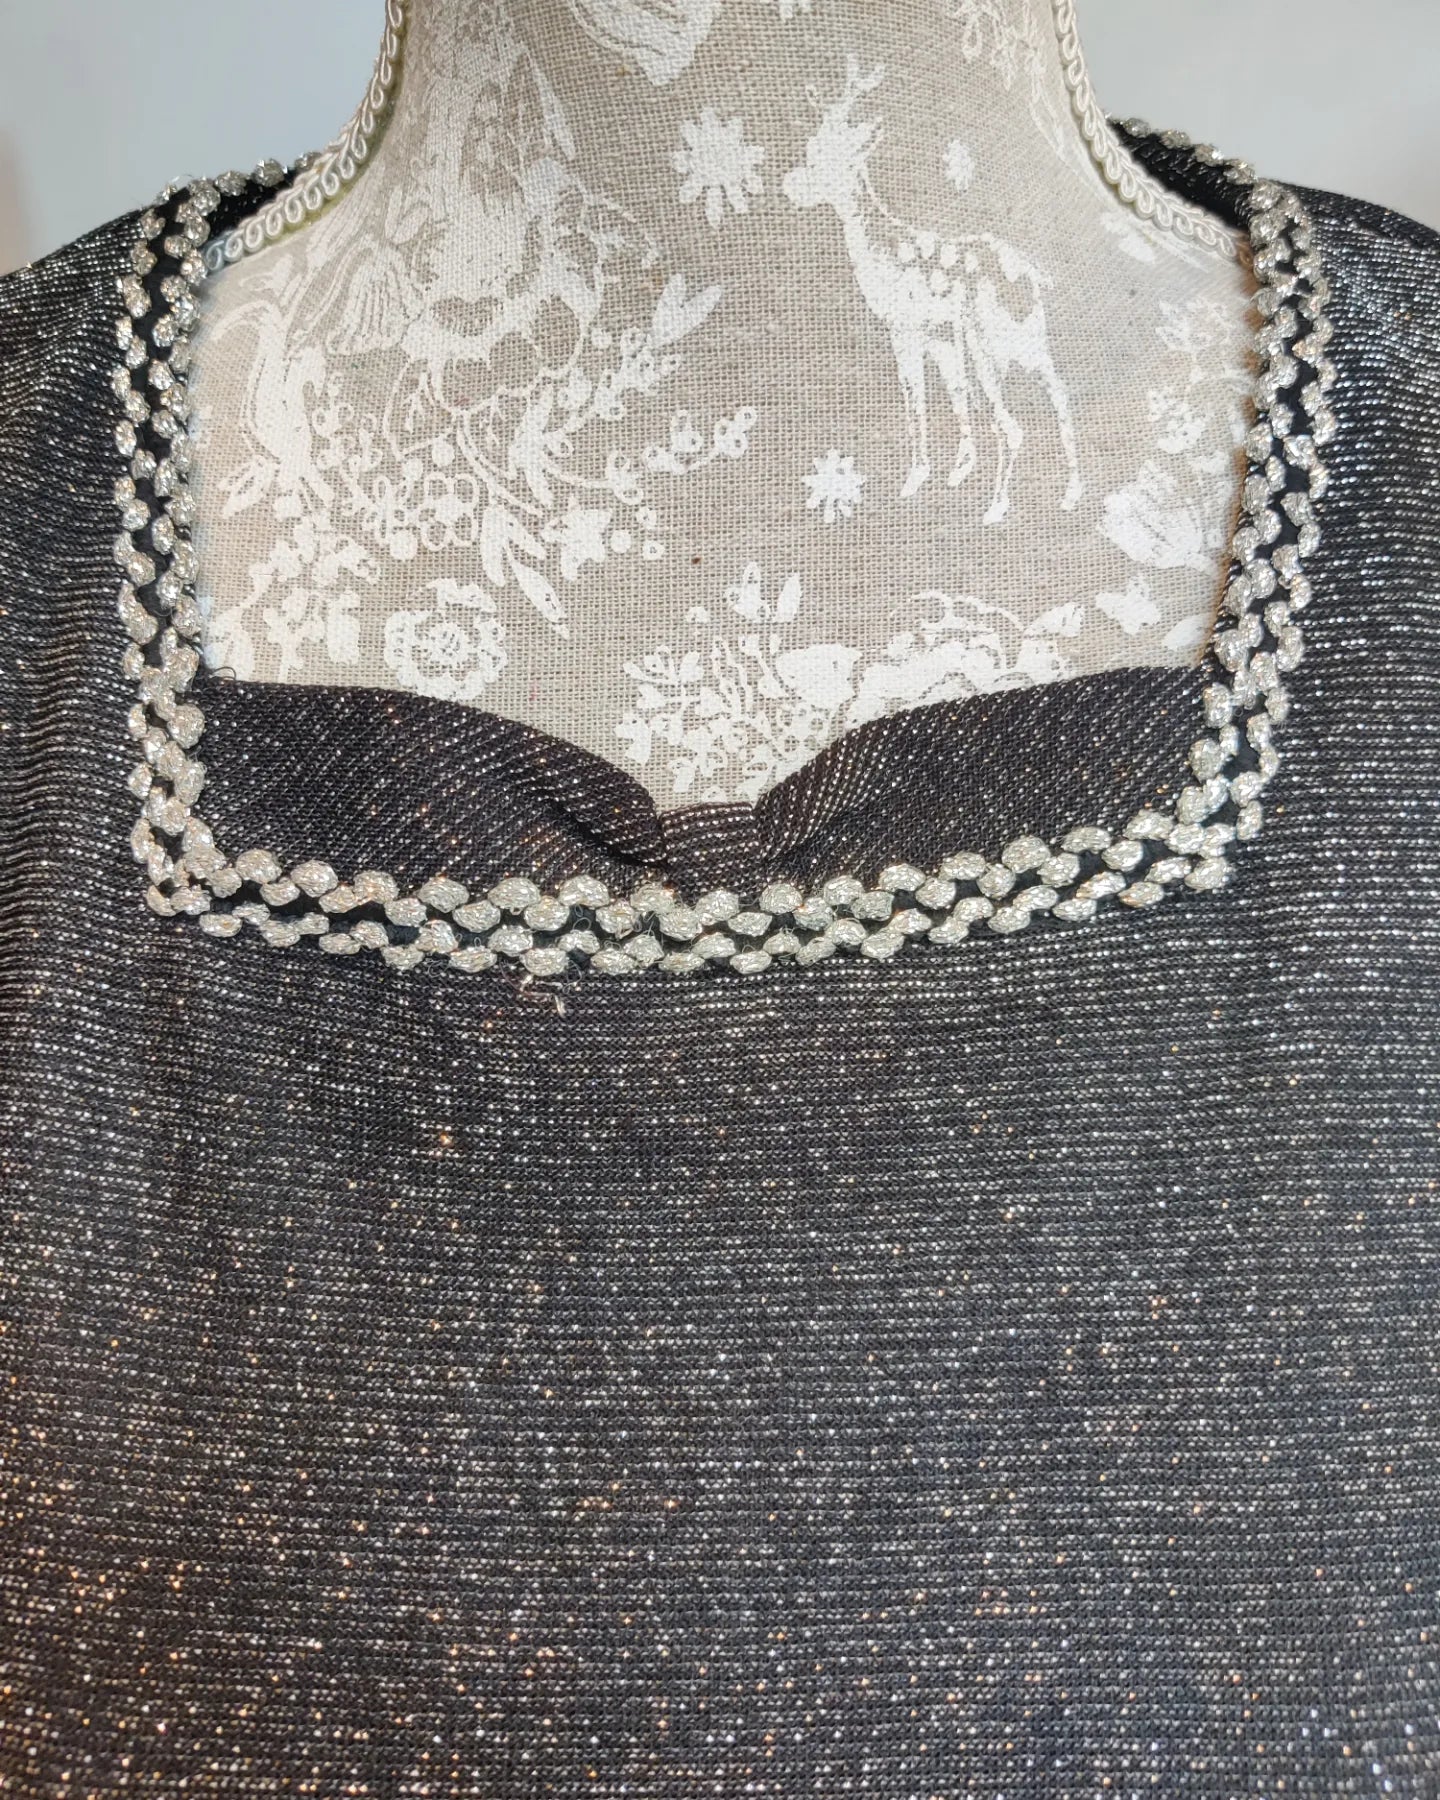 Beautiful 60s vintage top in silver